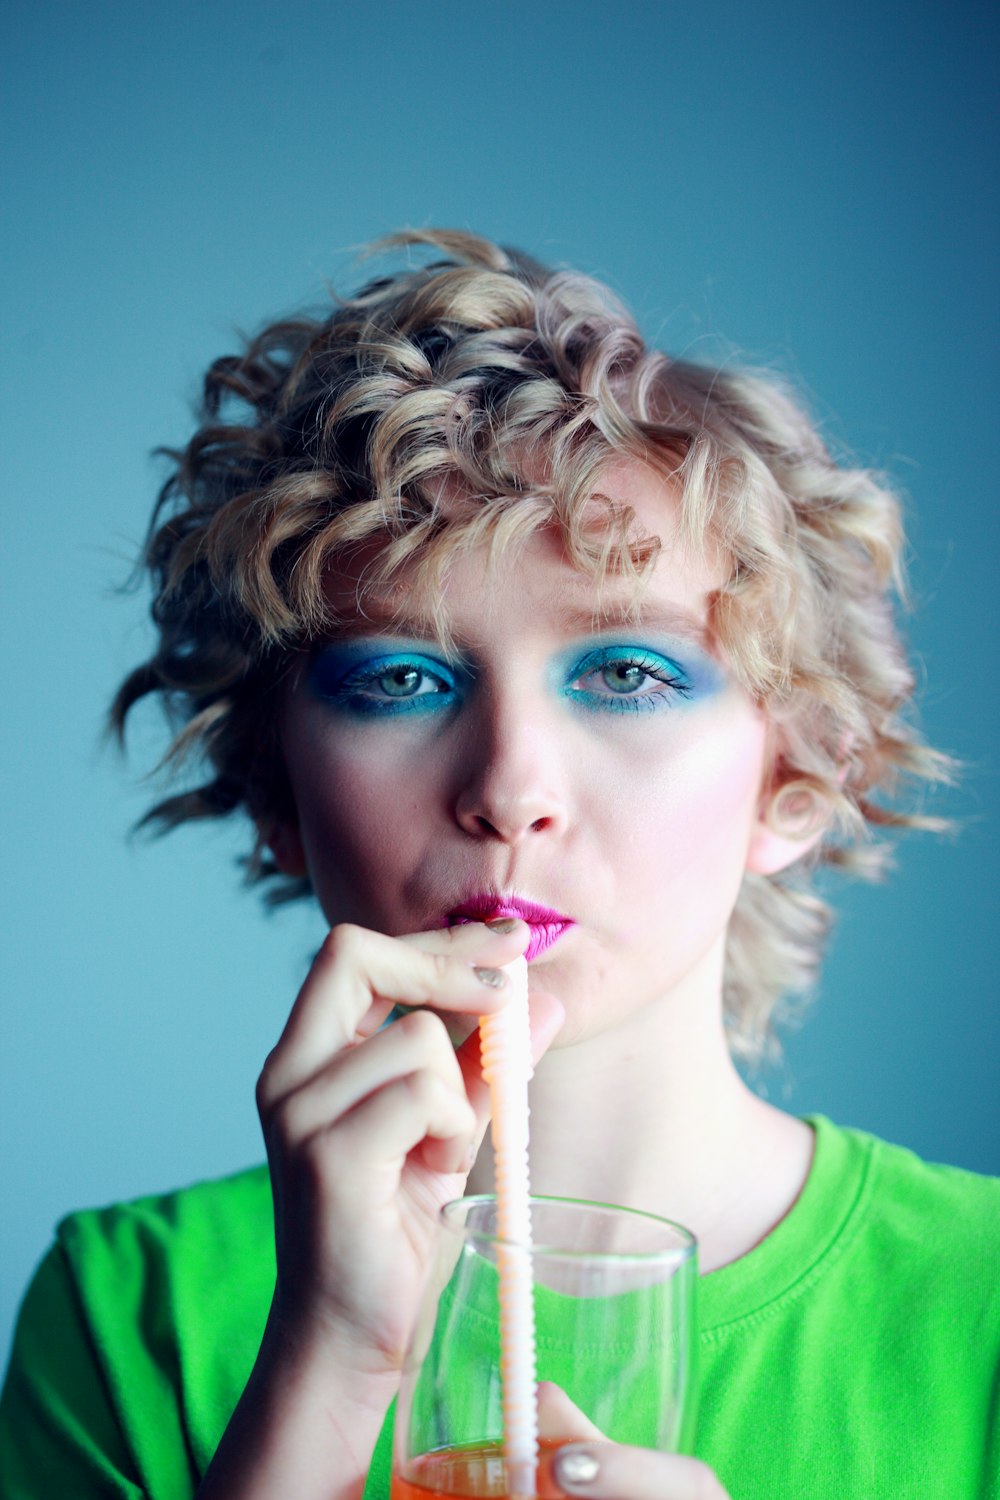 woman with blue eyemake up sipping beverage